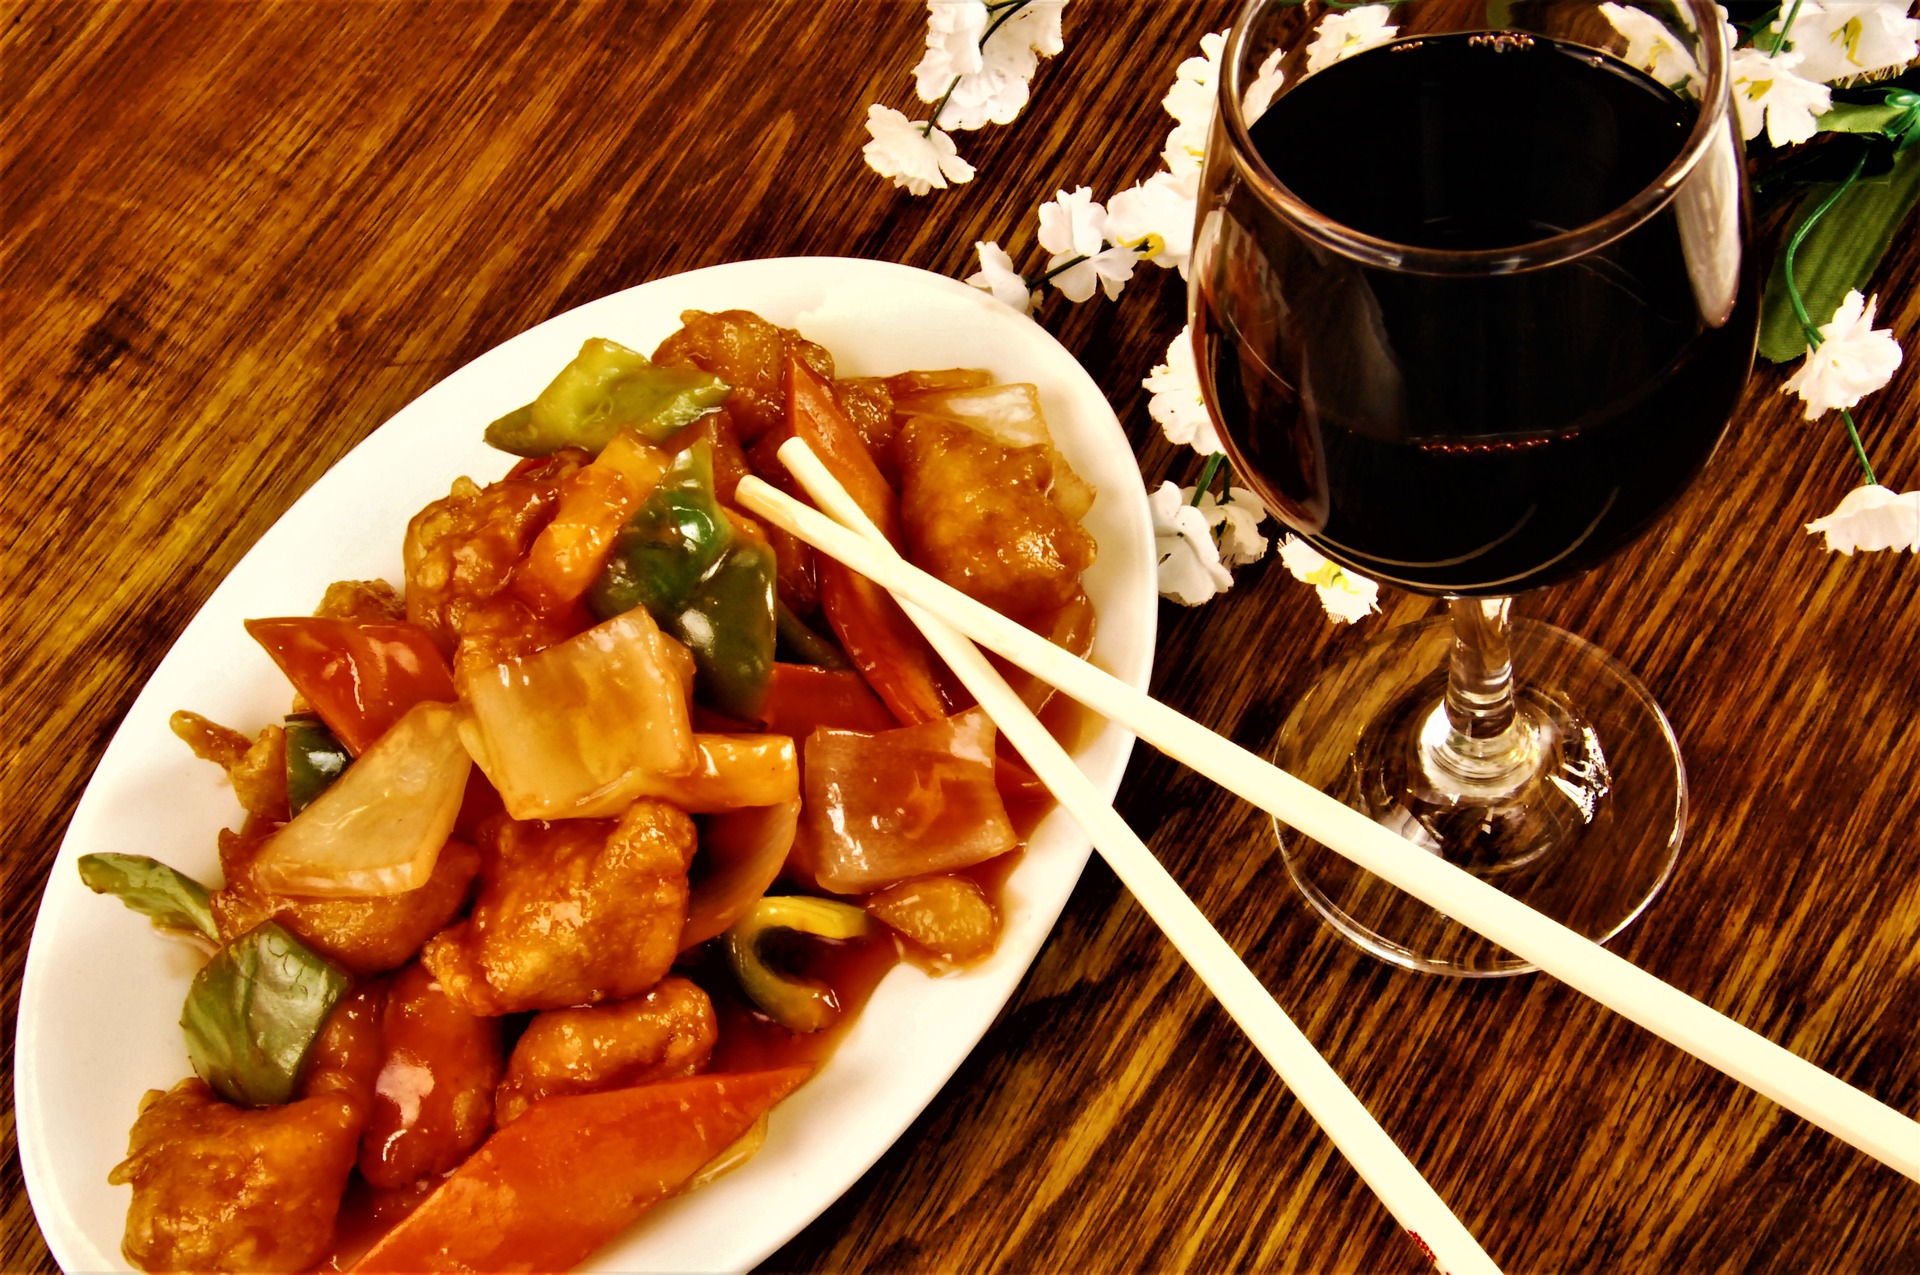 What Wine Goes With Chinese Food and How to Pair Them?